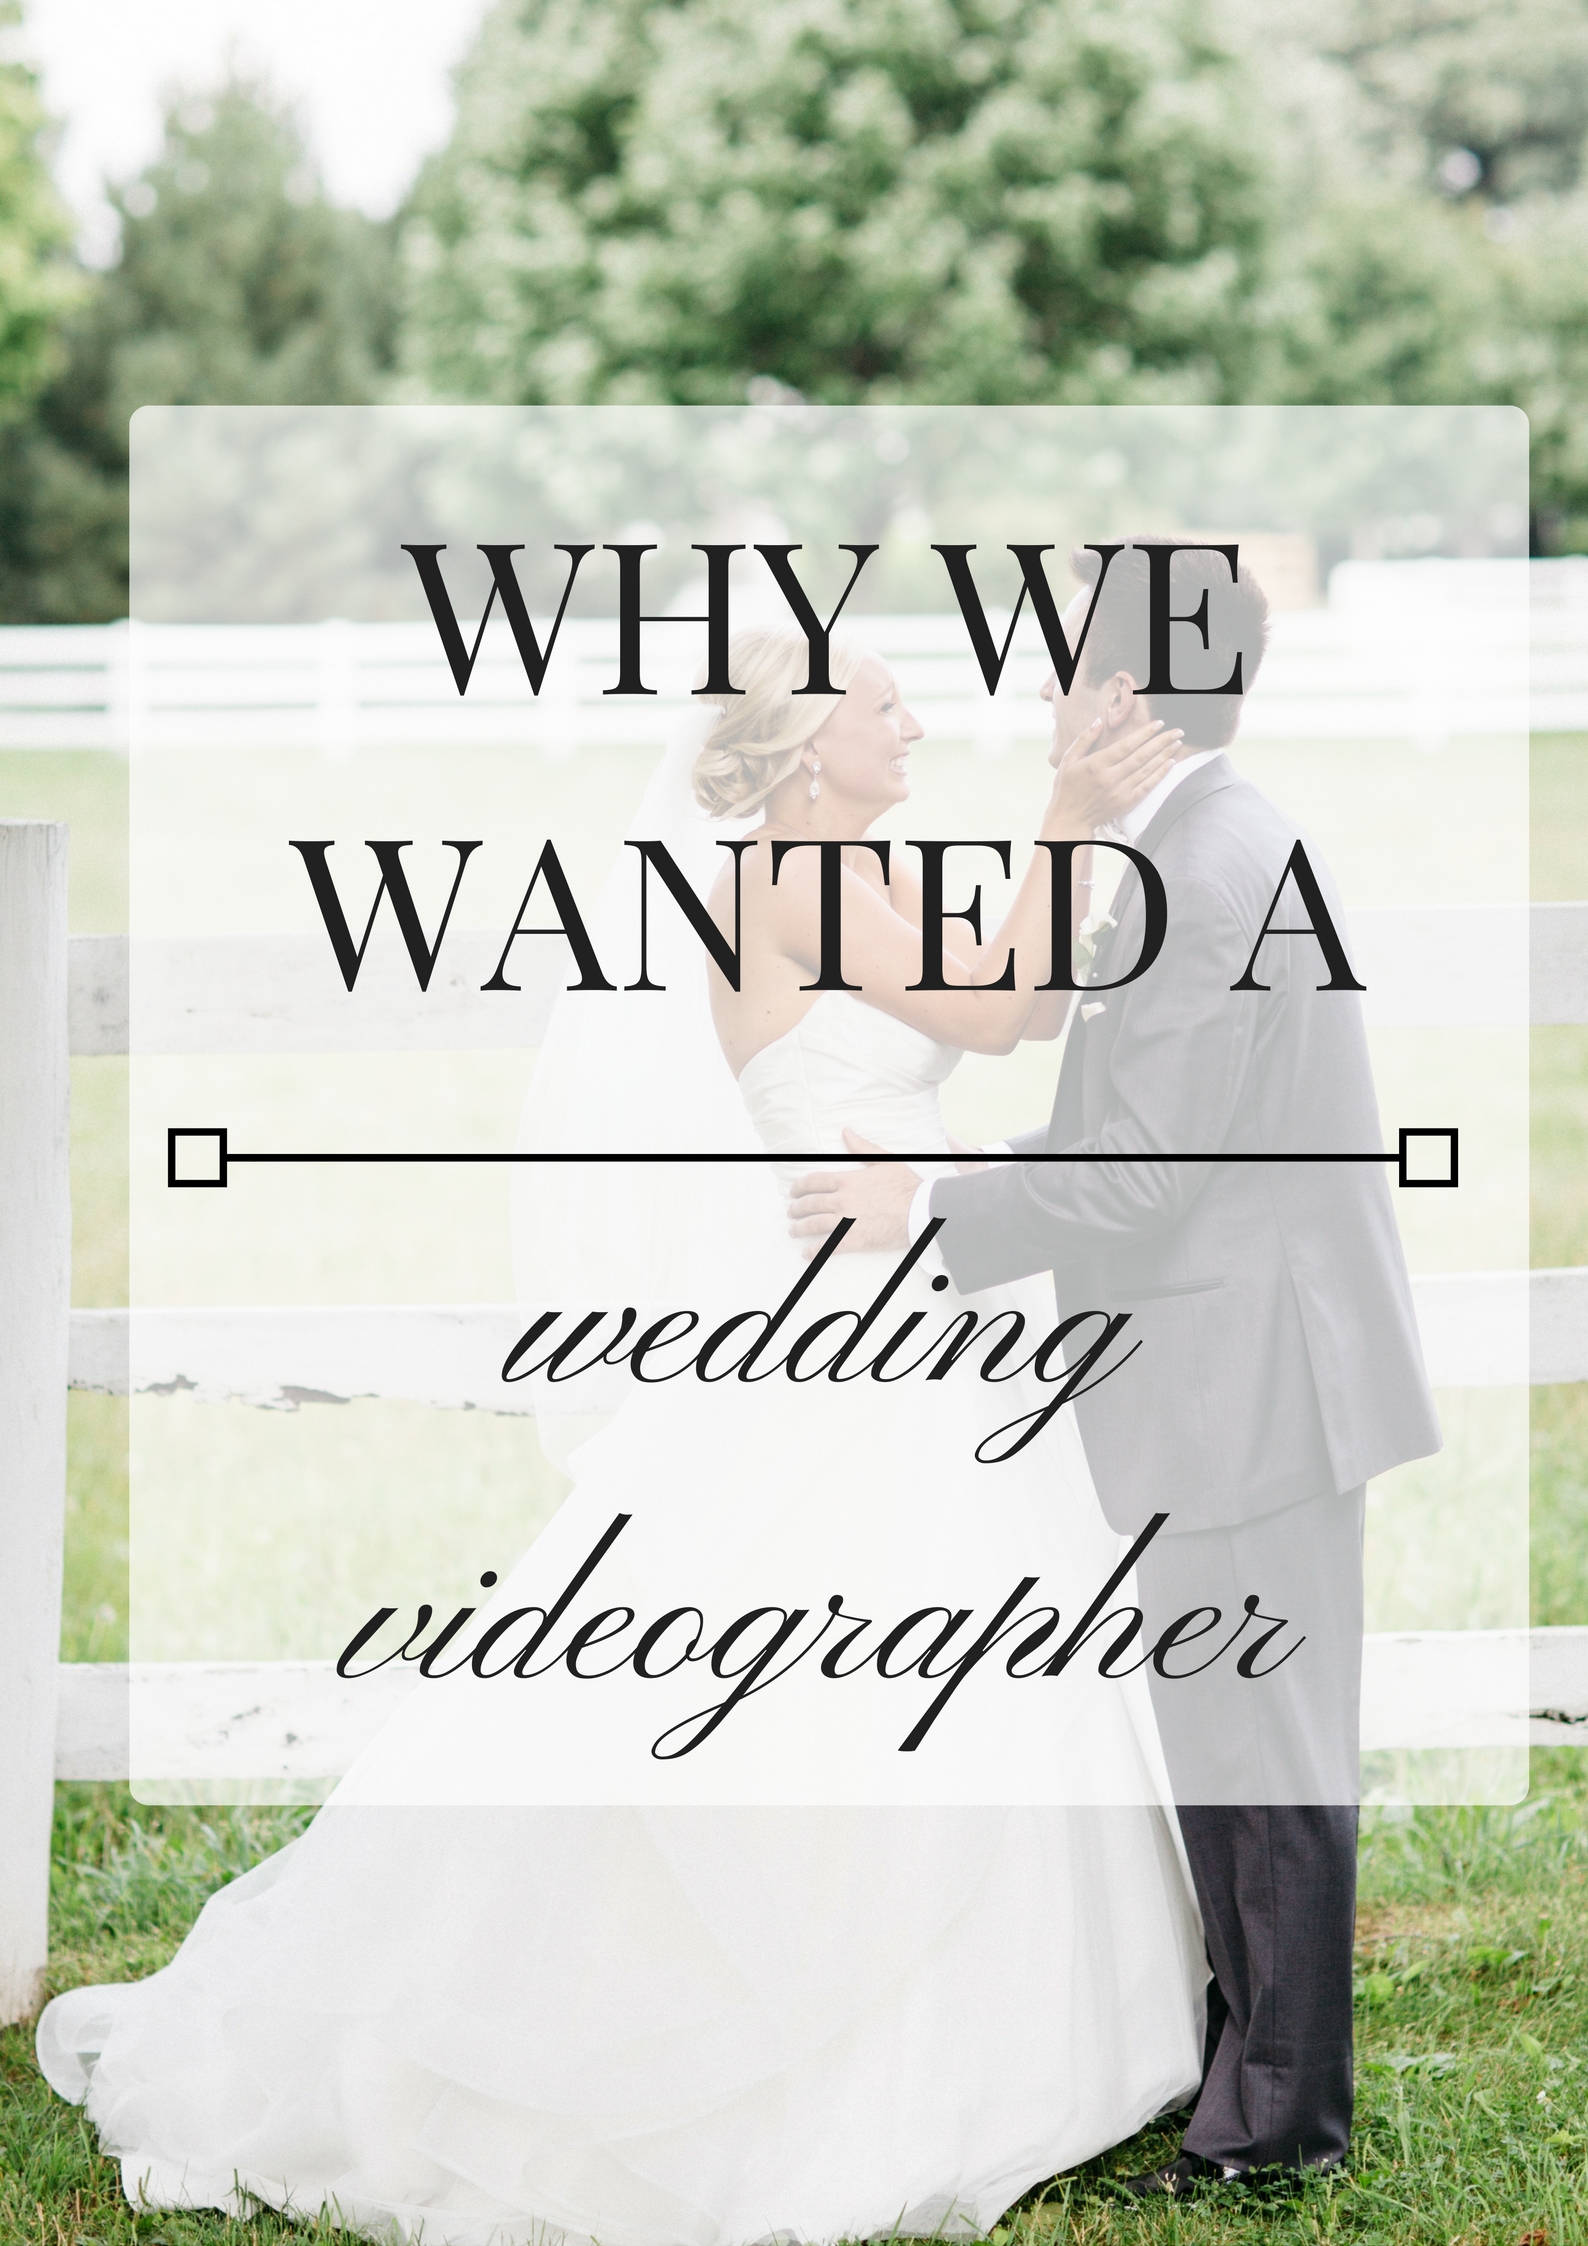 Why we wanted a wedding videographer [our wedding video]